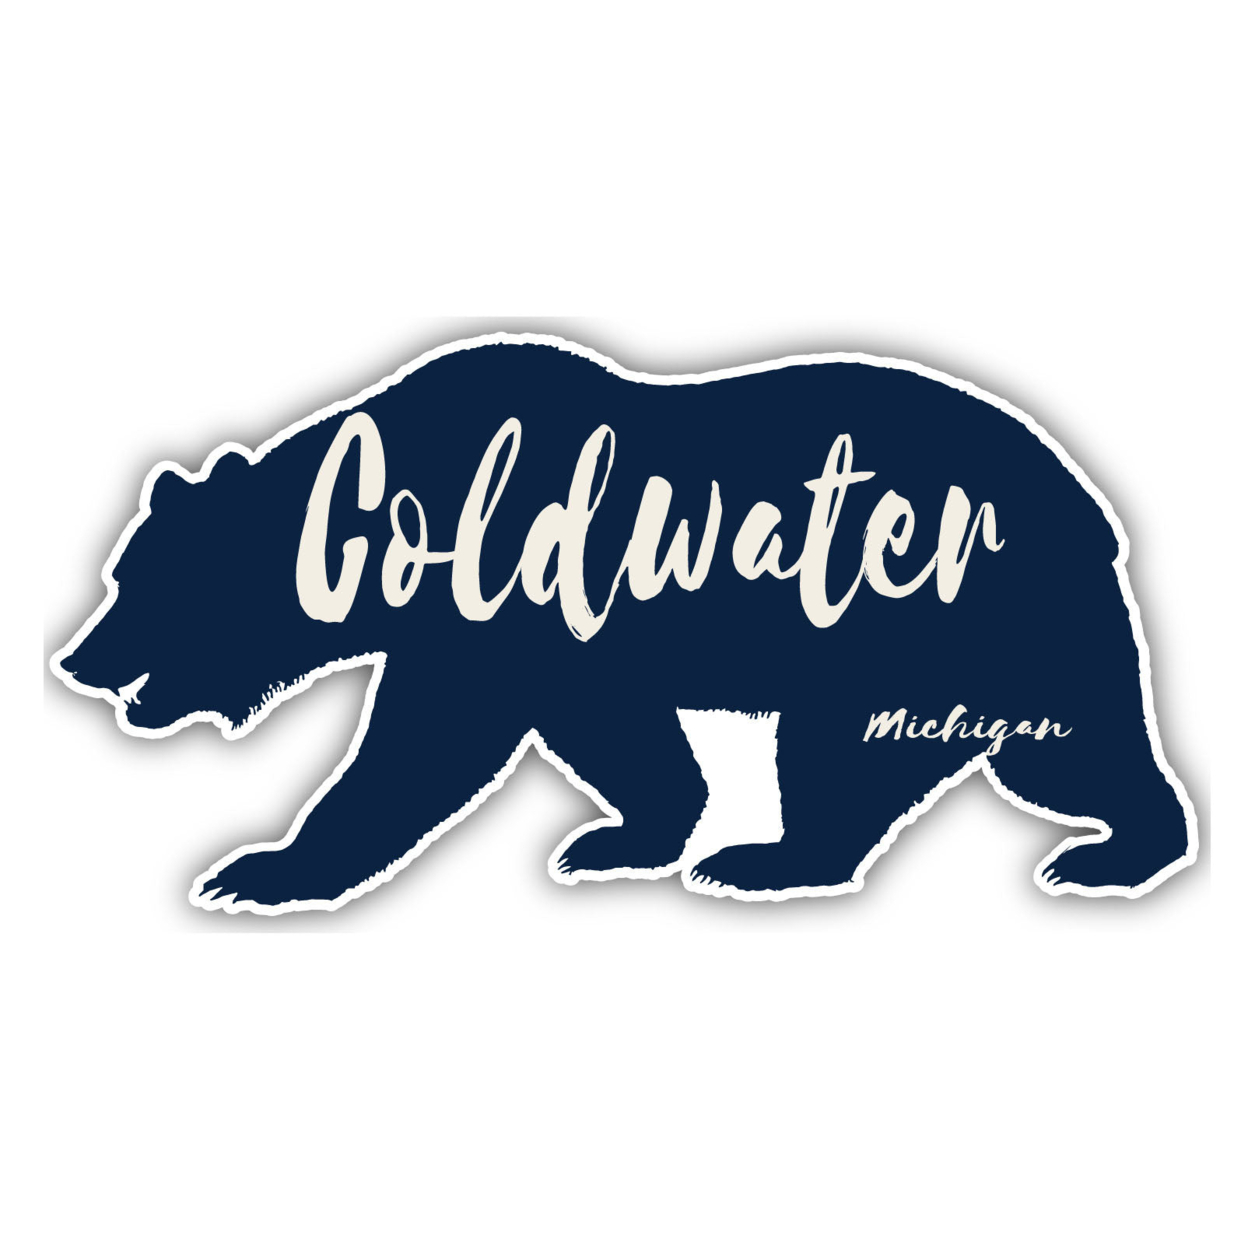 Coldwater Michigan Souvenir Decorative Stickers (Choose Theme And Size) - 4-Pack, 12-Inch, Bear